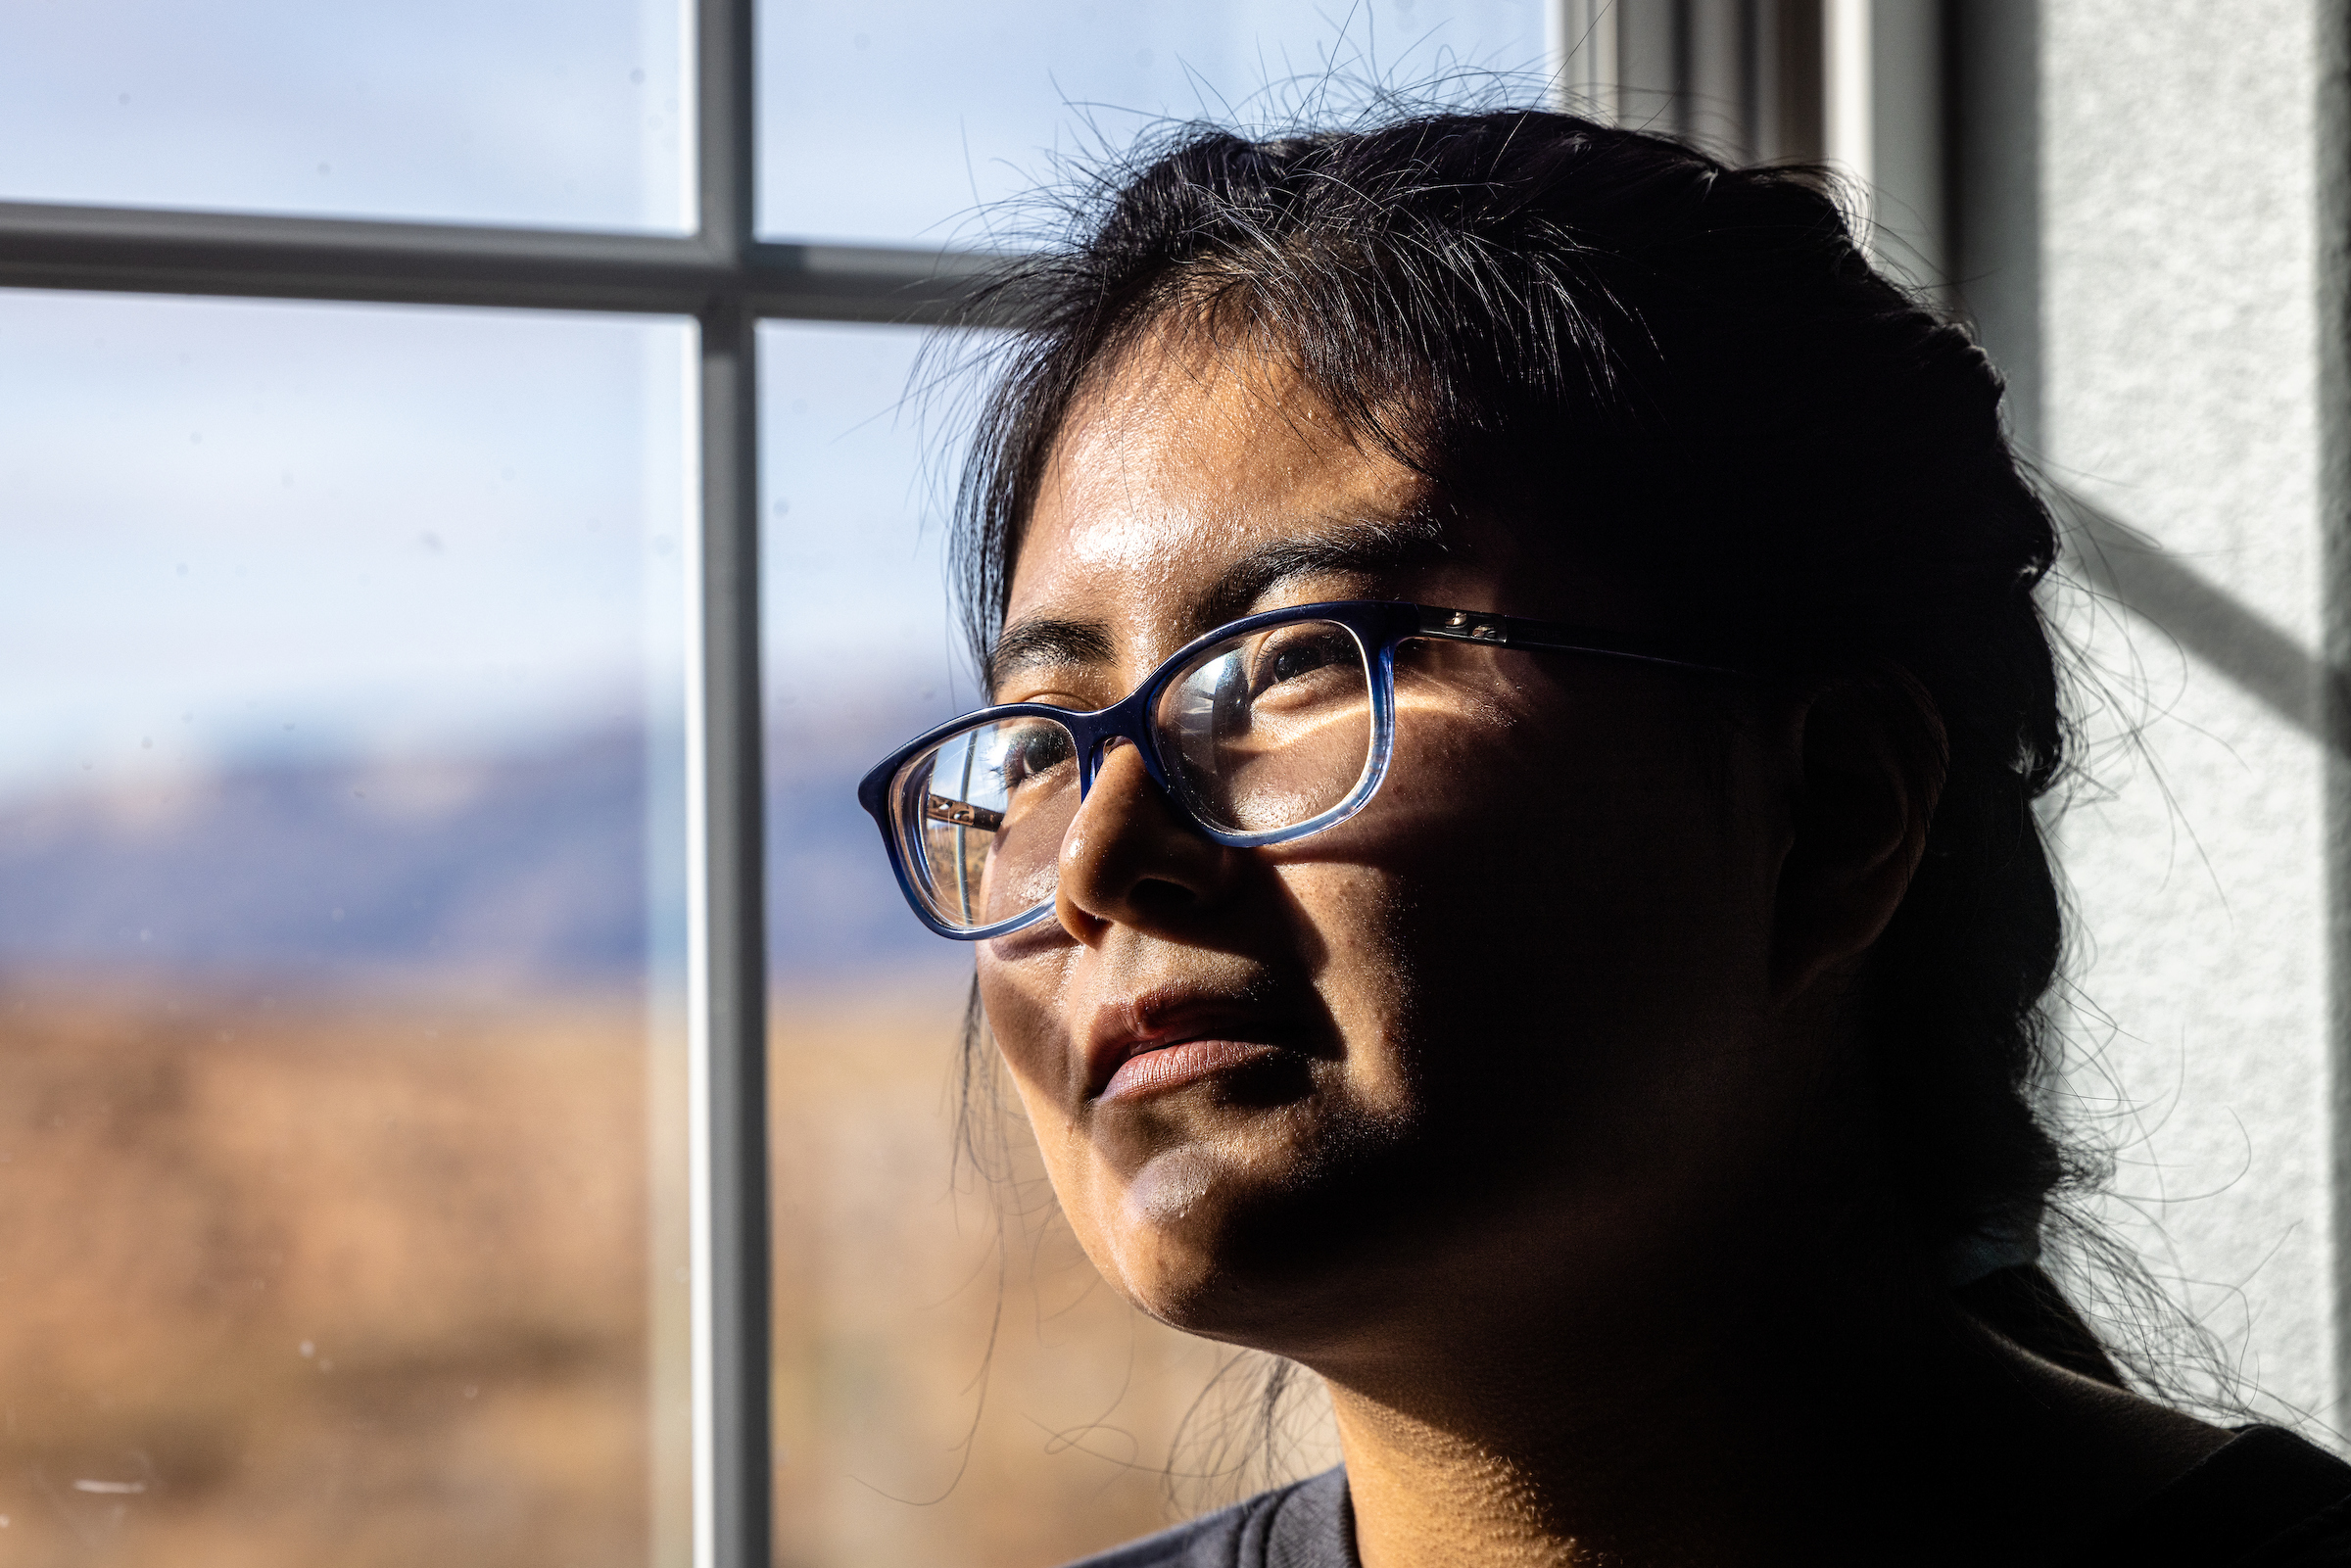 A young Native American woman looks out a window with the light playing across her face